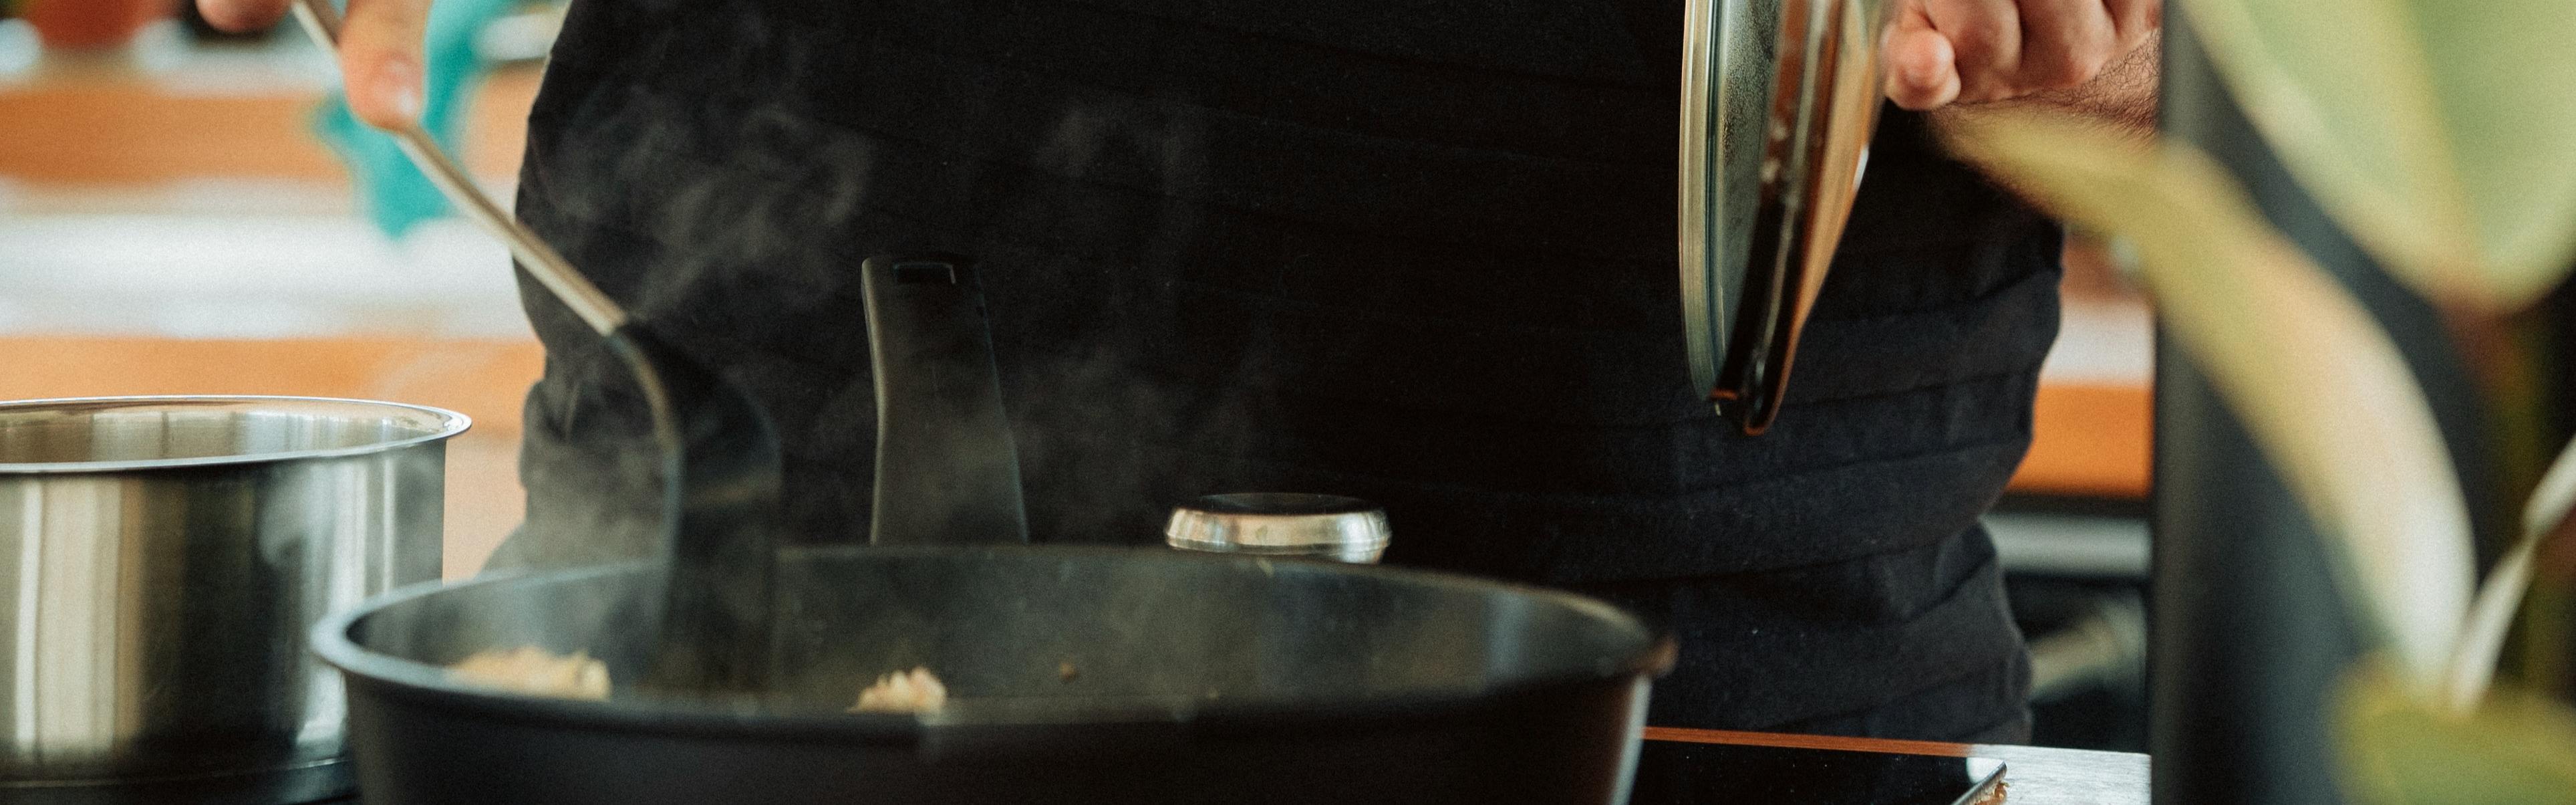 What Is PFOA-Free Cookware? The Facts You Should Know - Prudent